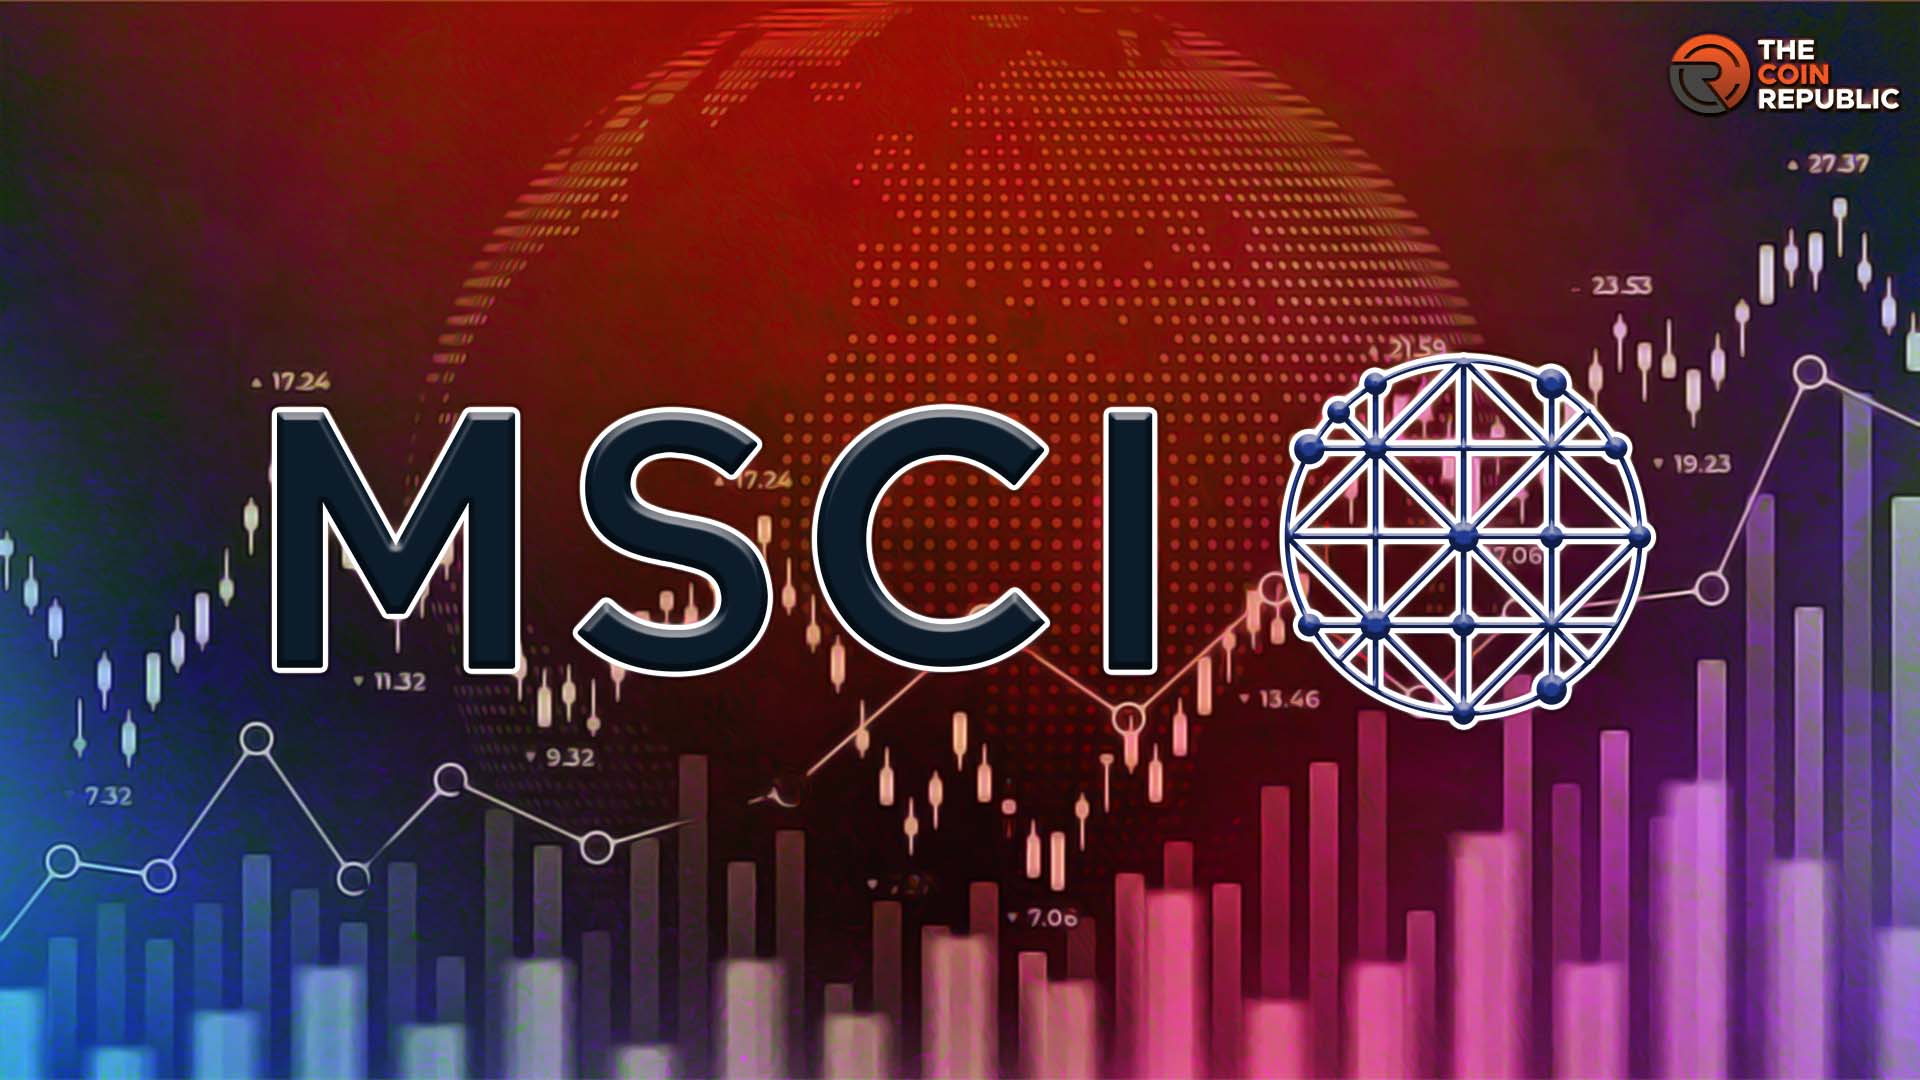 MSCI Stock Loses $3.86, With Declining Prices Attracting Buyers